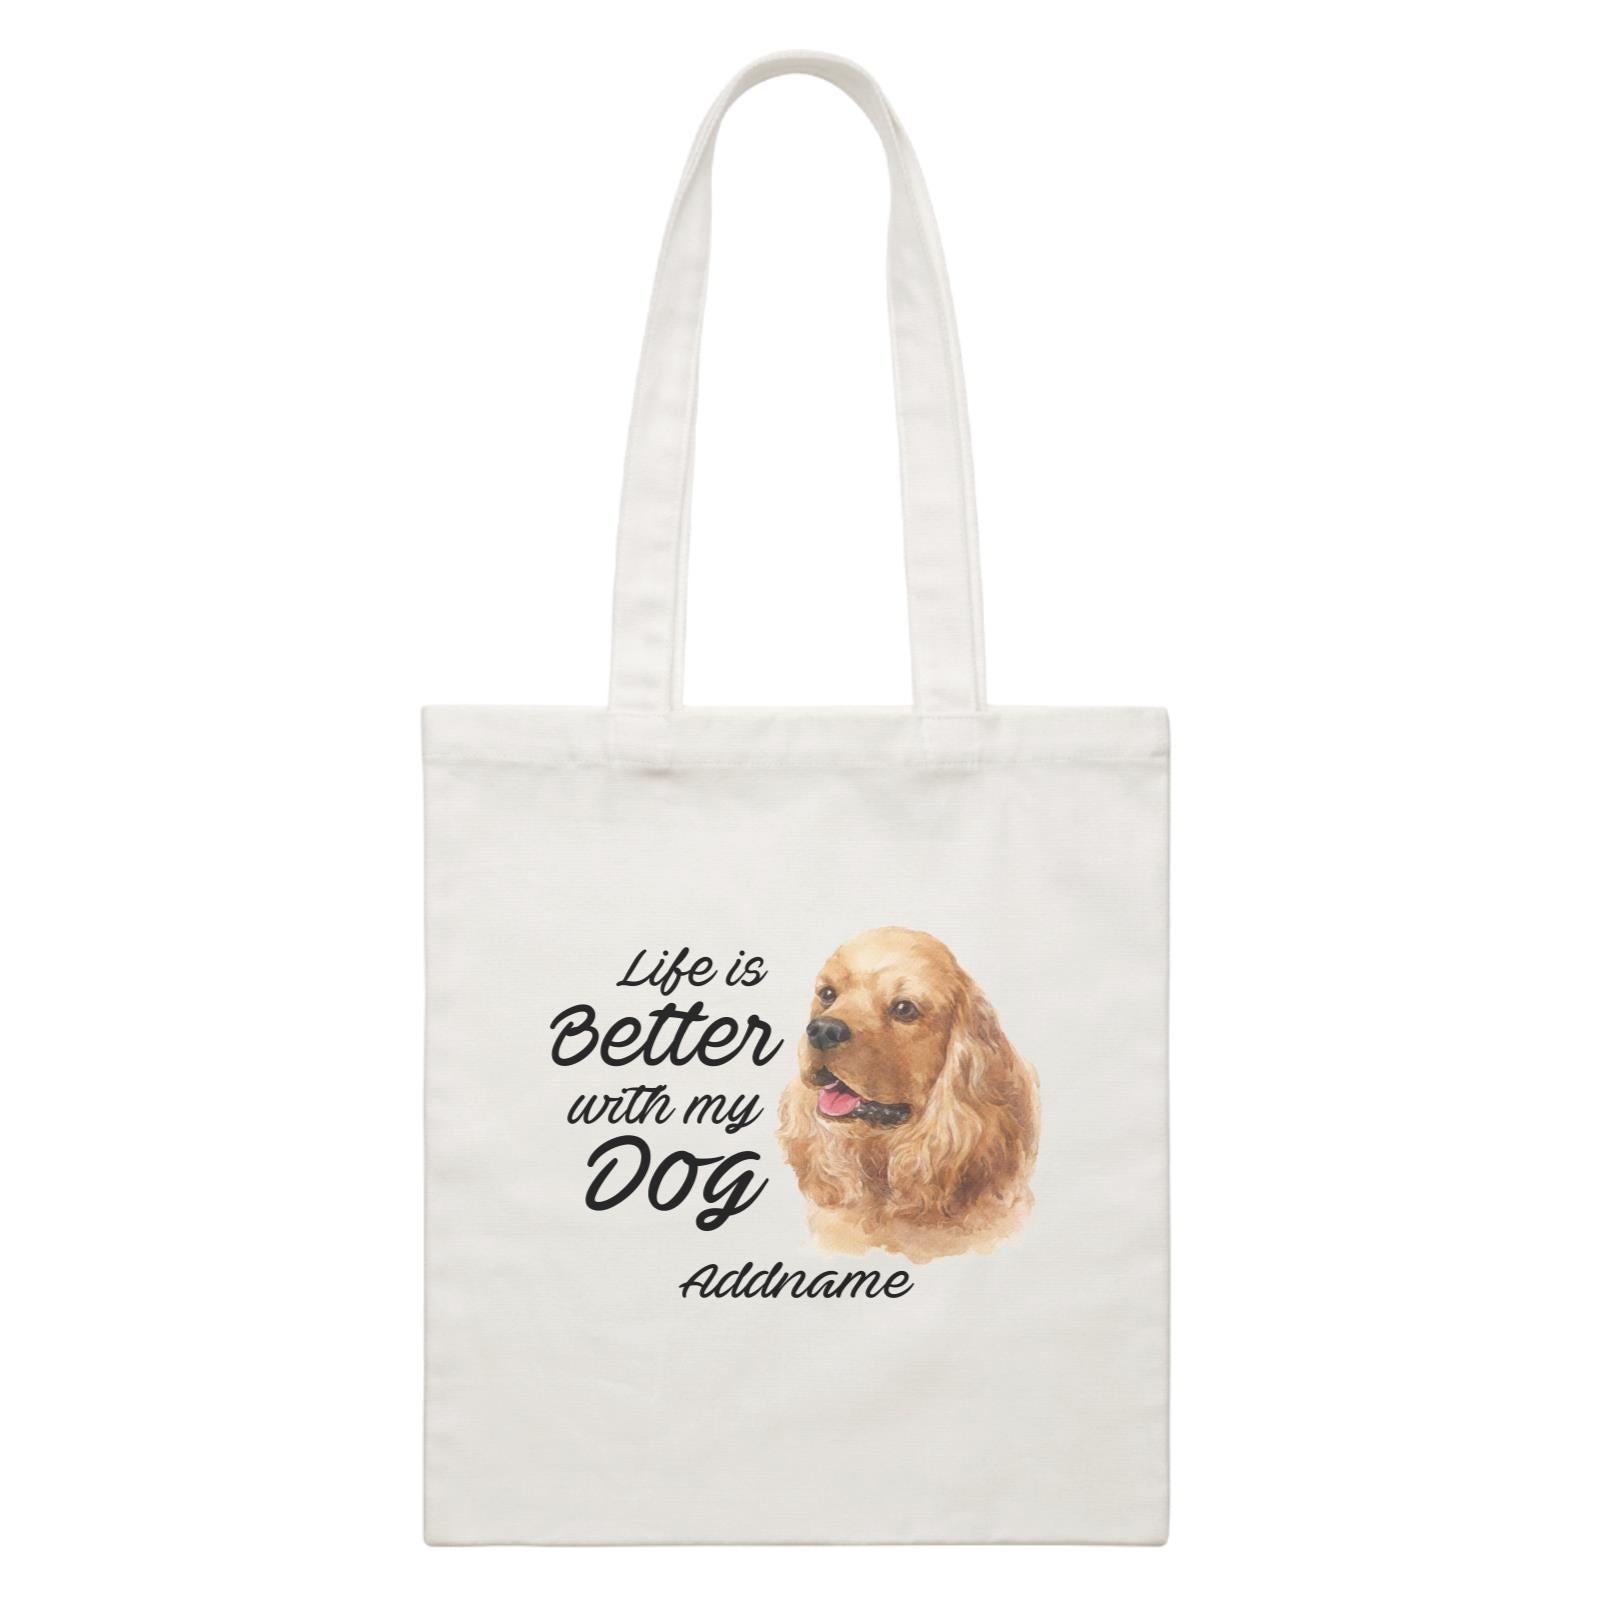 Watercolor Life is Better With My Dog Cocker Spaniel Addname White Canvas Bag